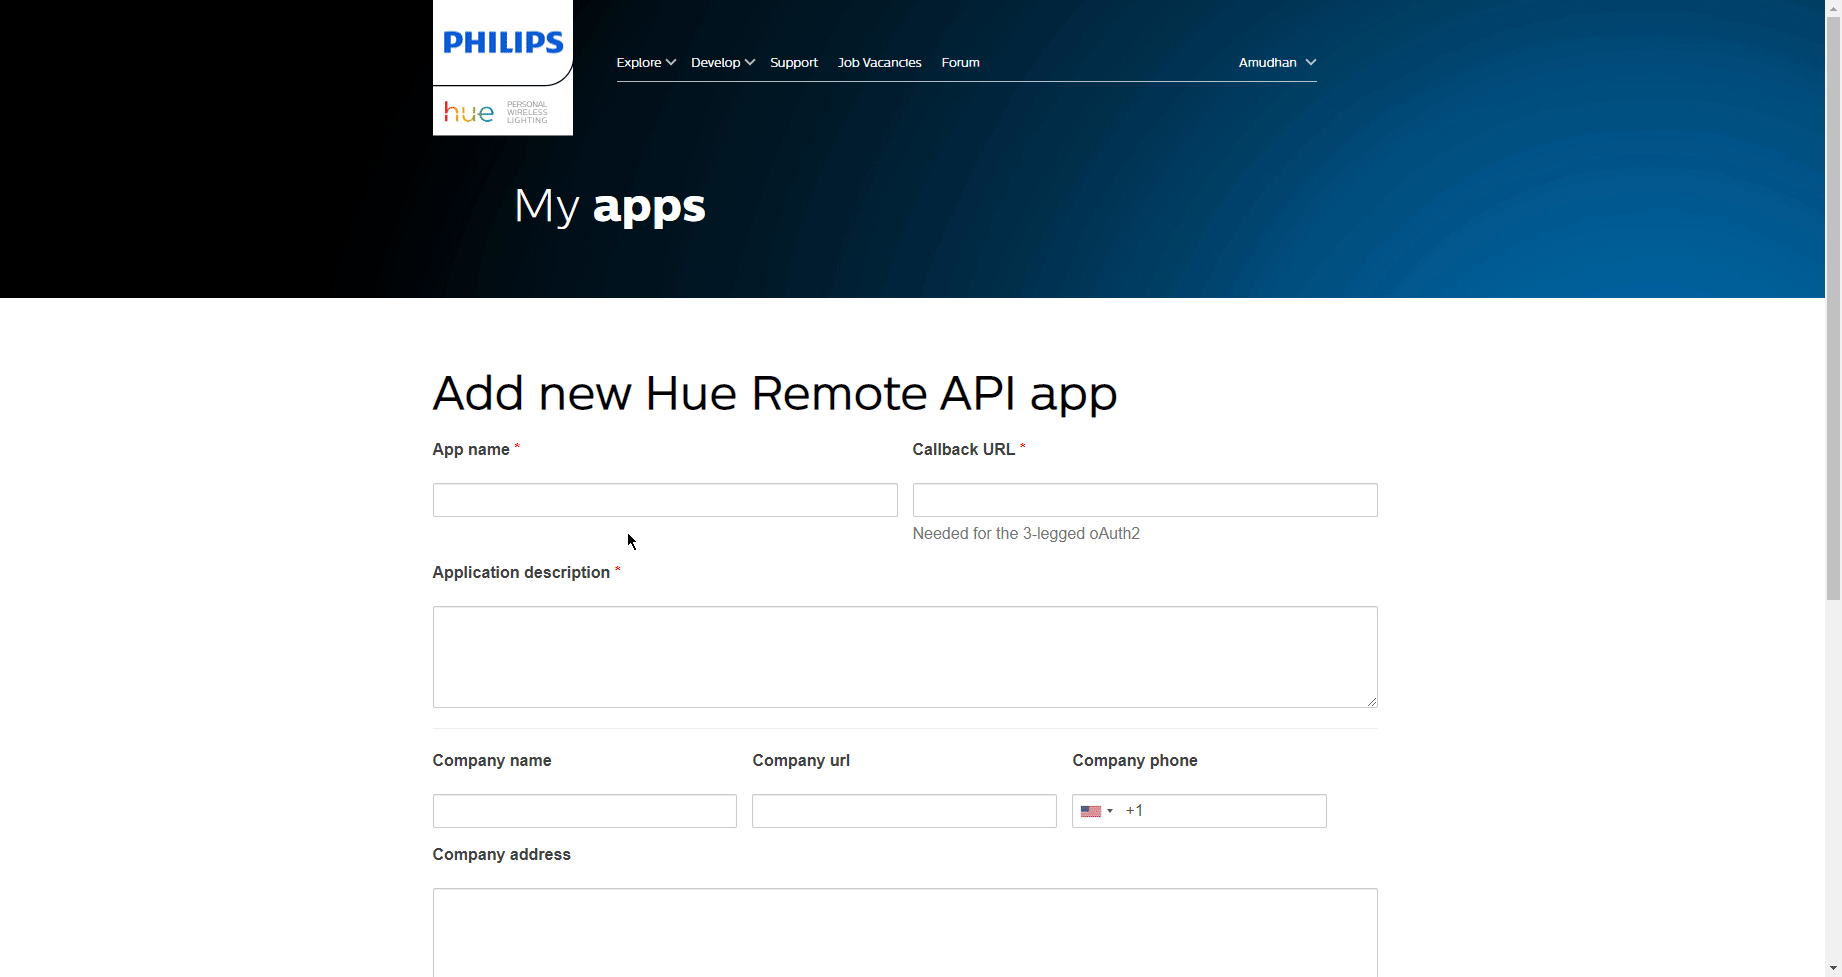 Getting Philips Hue credentials